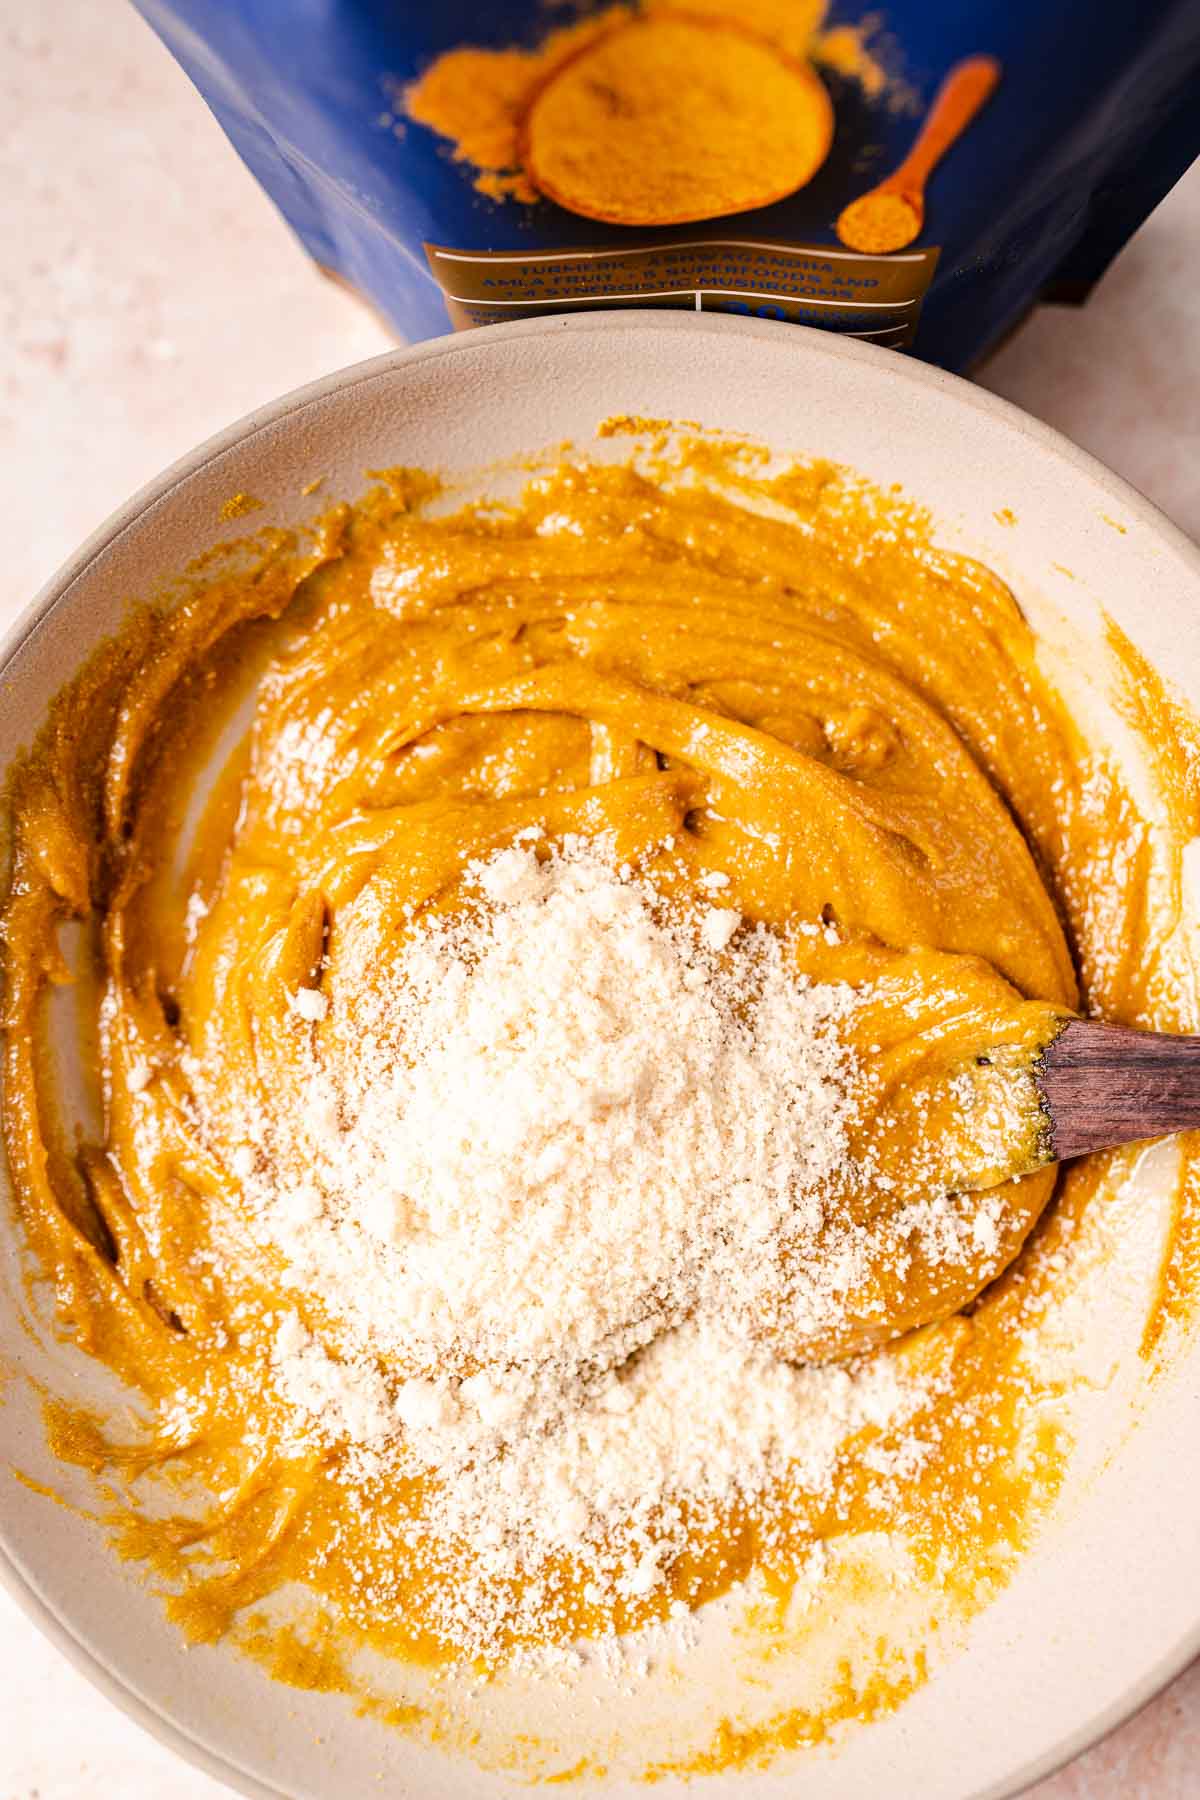 A bowl filled with yellow batter and white almond flour.